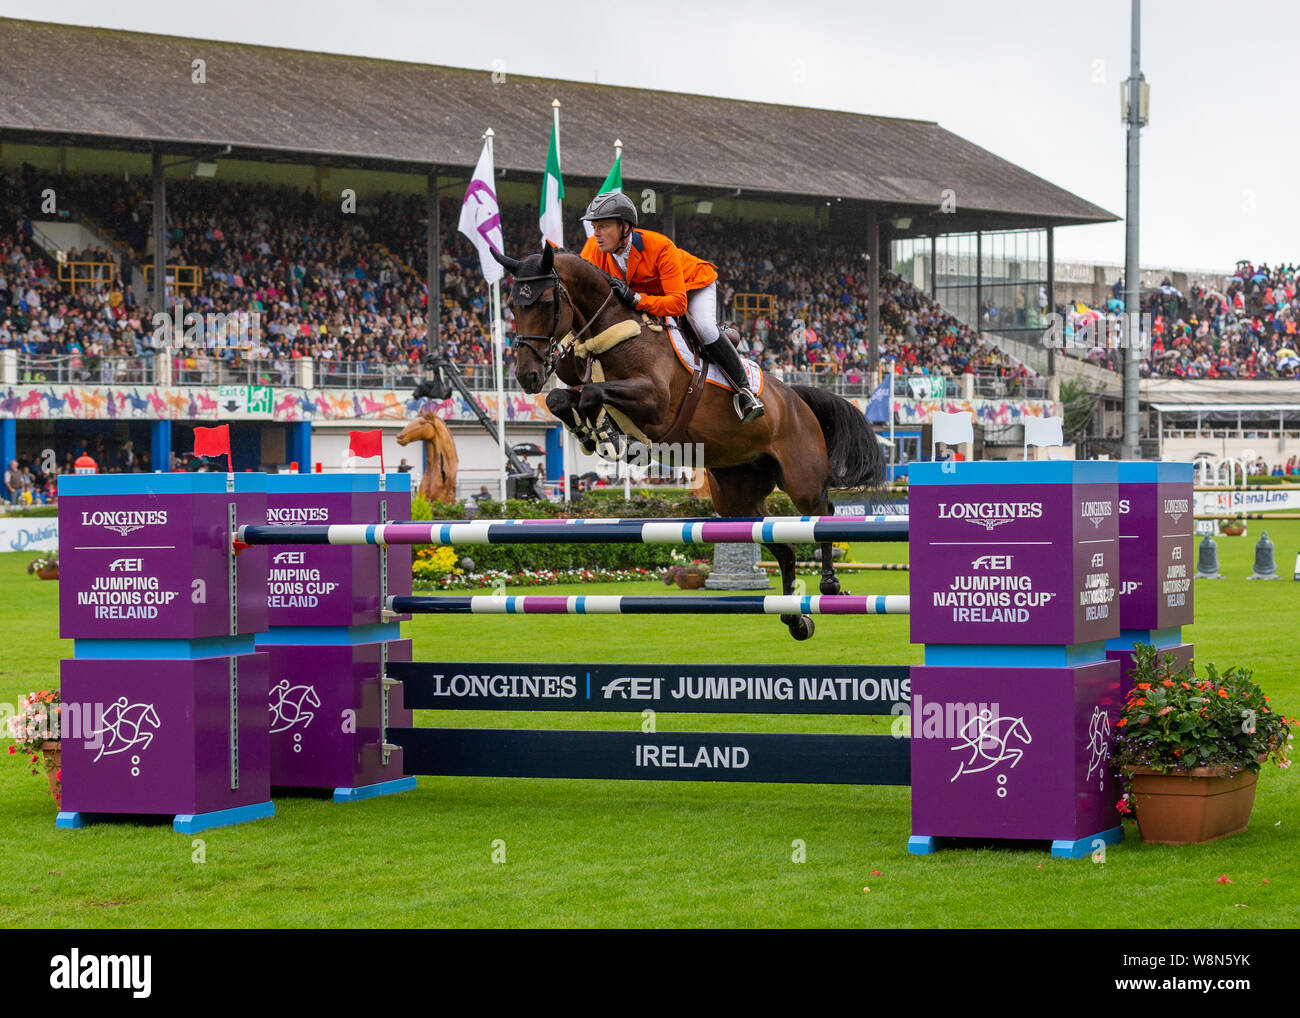 Dublin, Ireland 09 august 2019. Willem Greve for Team Netherlands compete for the Aga Khan Cup in the Longines Nations Cup Show Jumping at the RDS Dublin Horse Show. Credit: John Rymer/Alamy Live News Stock Photo